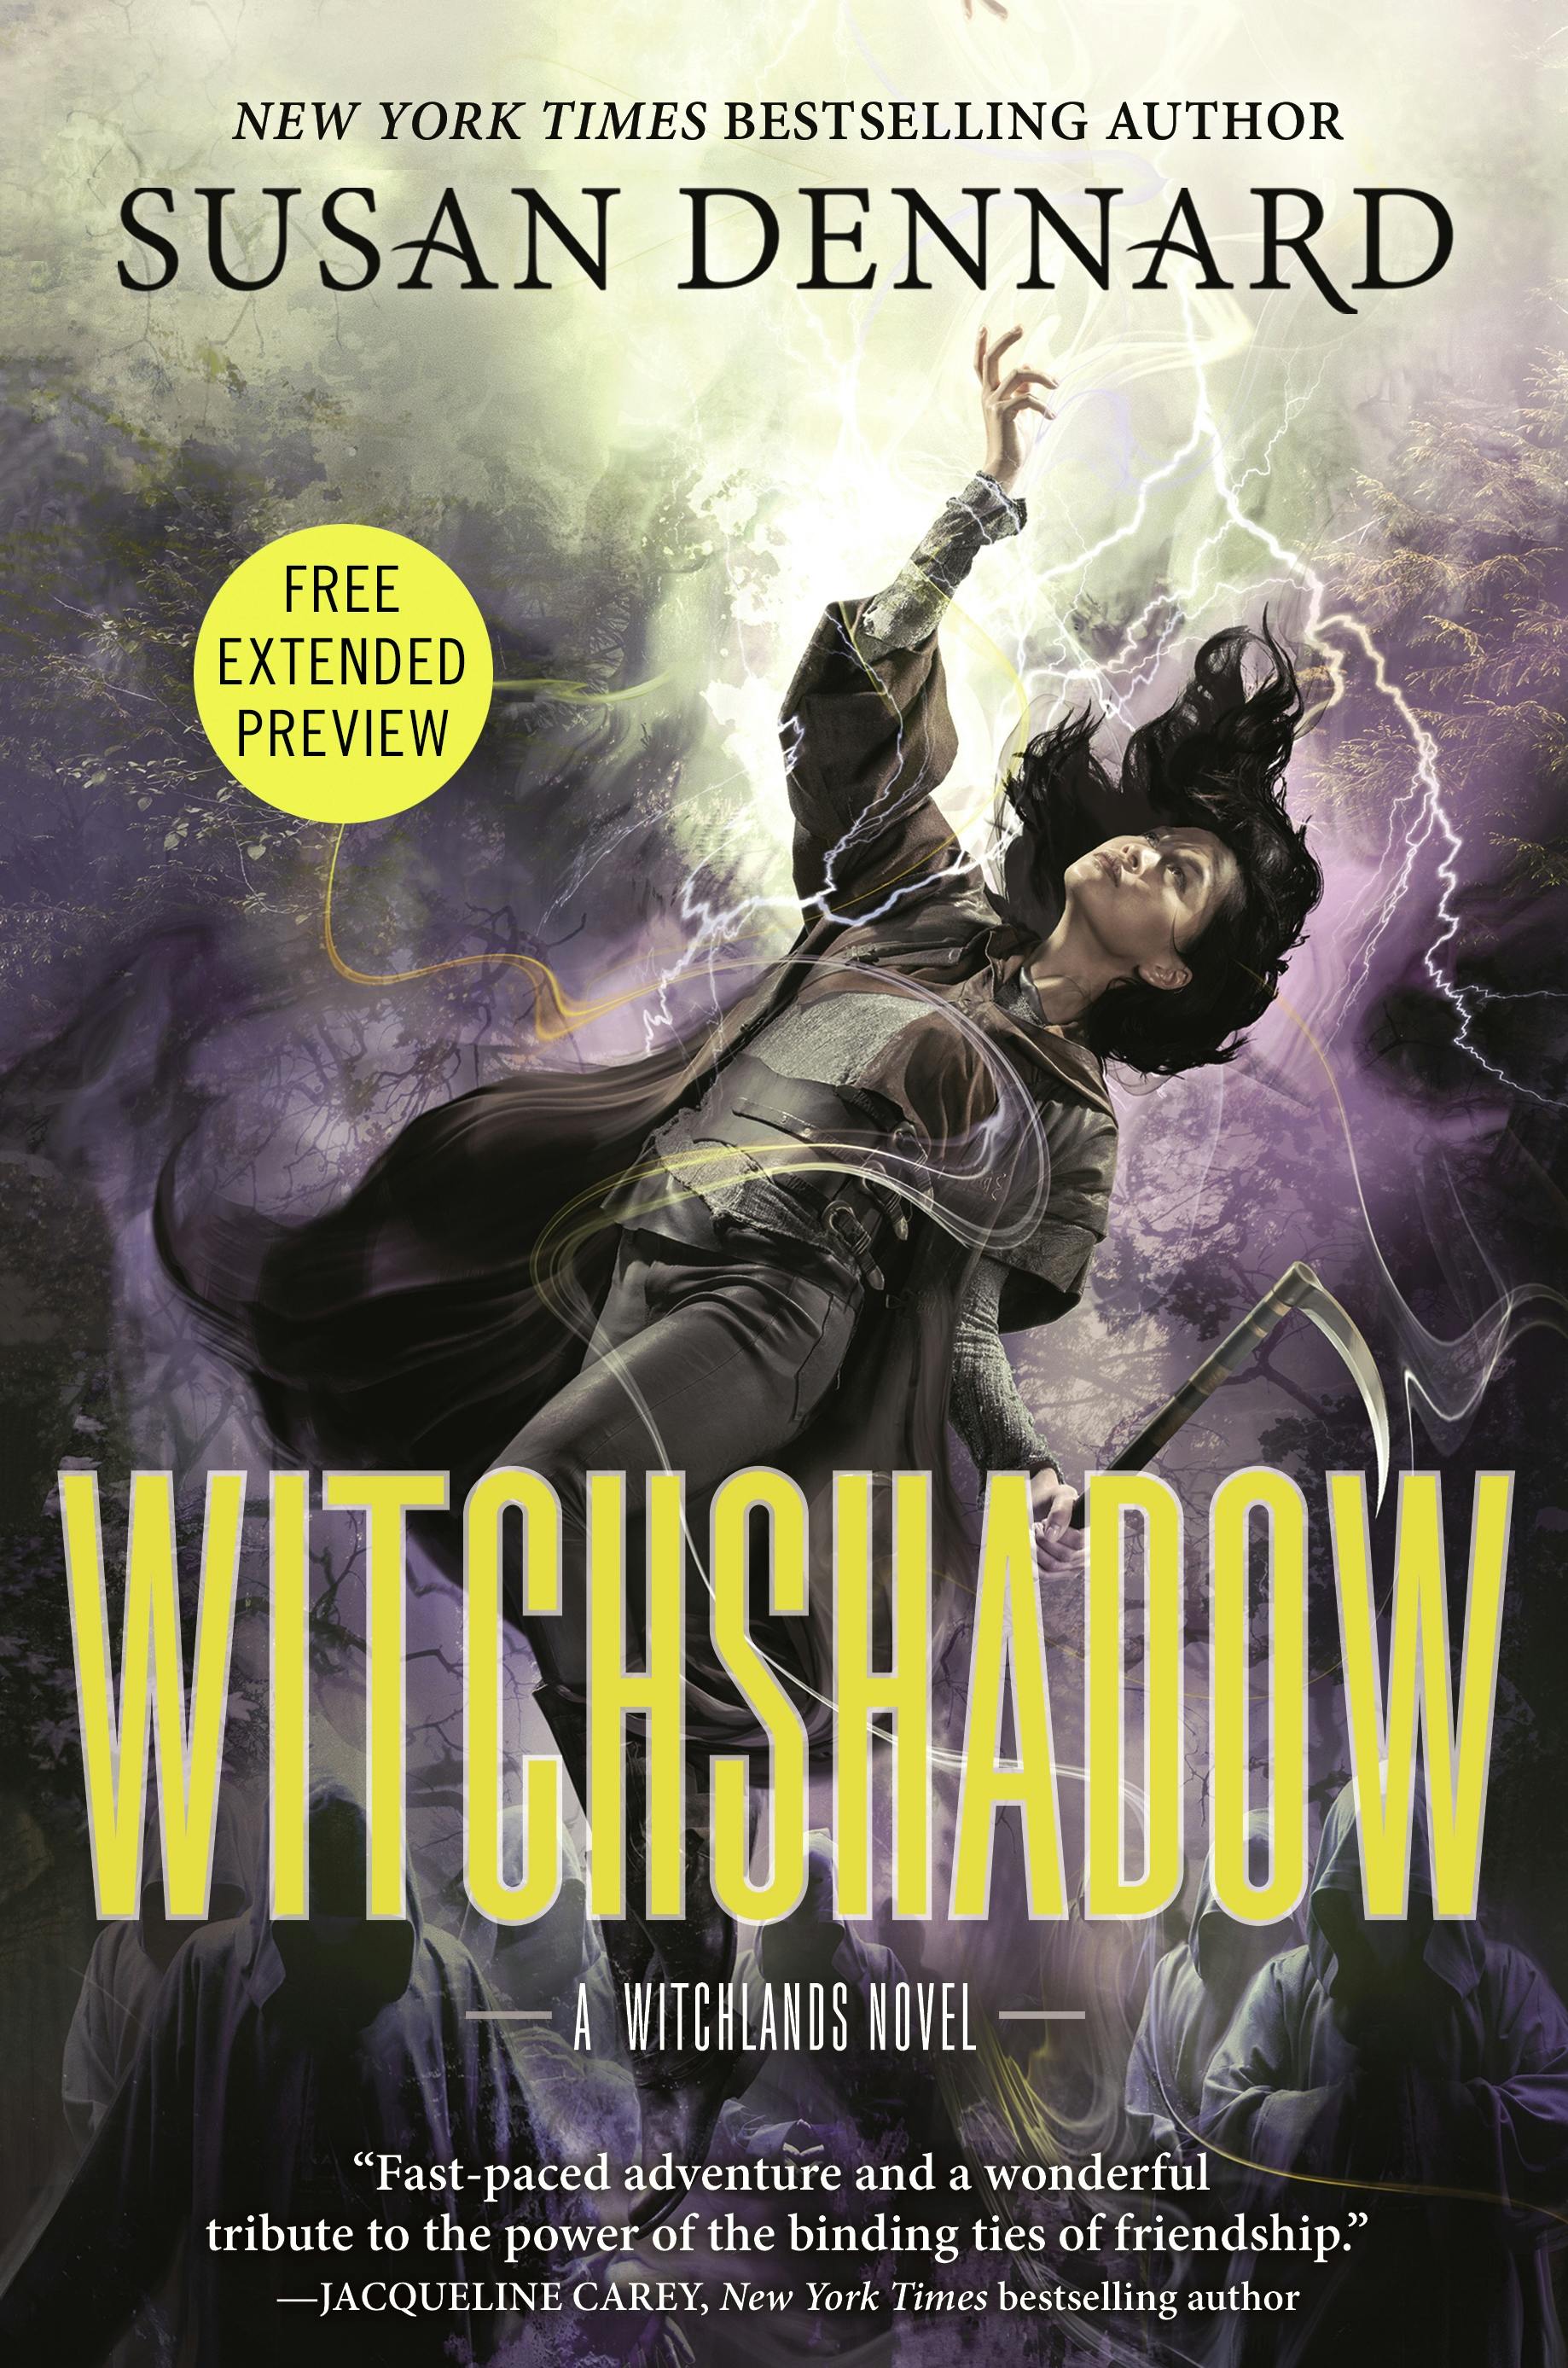 Cover for the book titled as: Witchshadow Sneak Peek